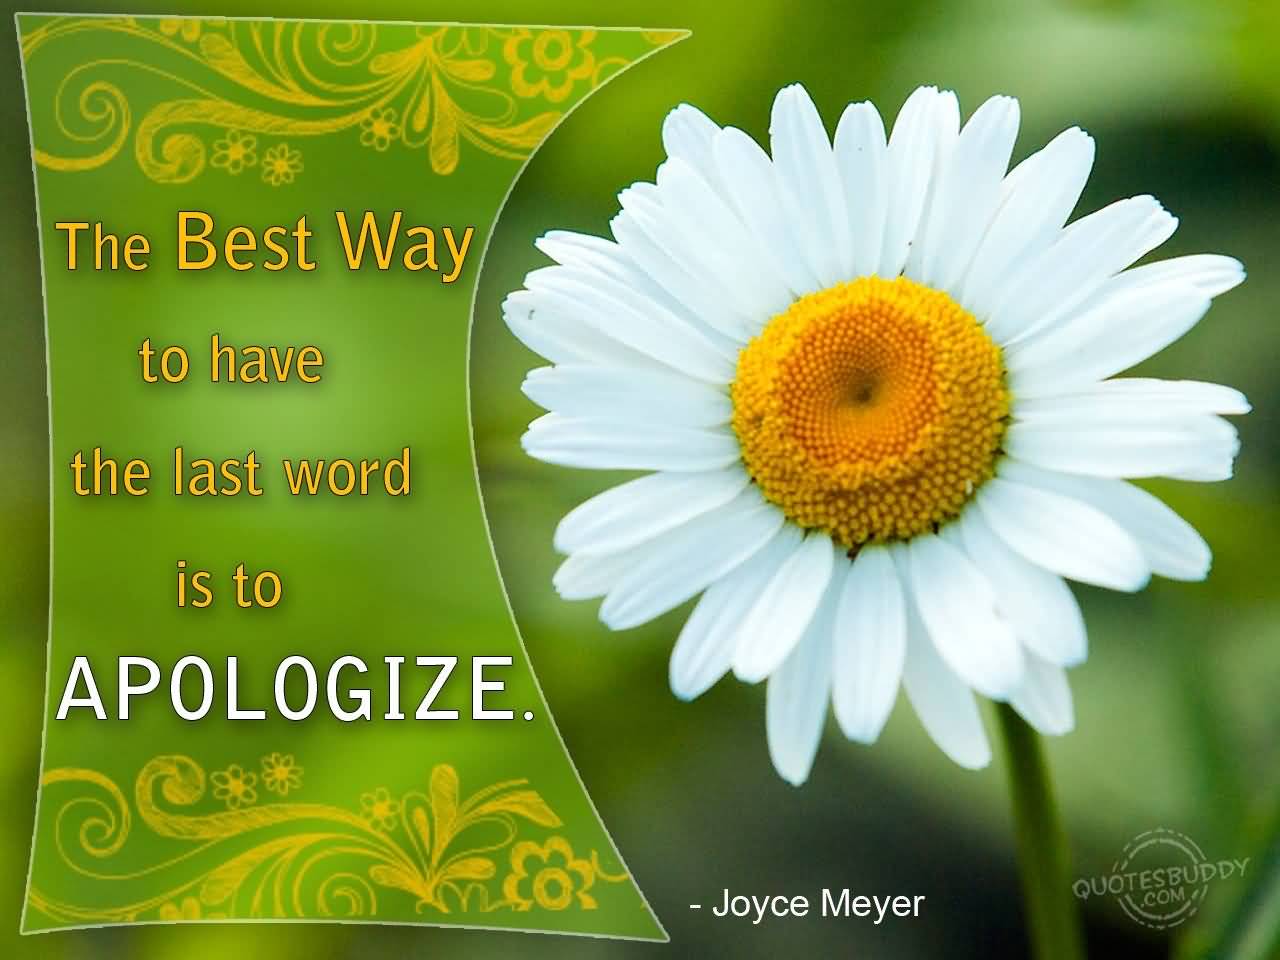 The best way to have the last word is to apologize. - Joyce Meyer